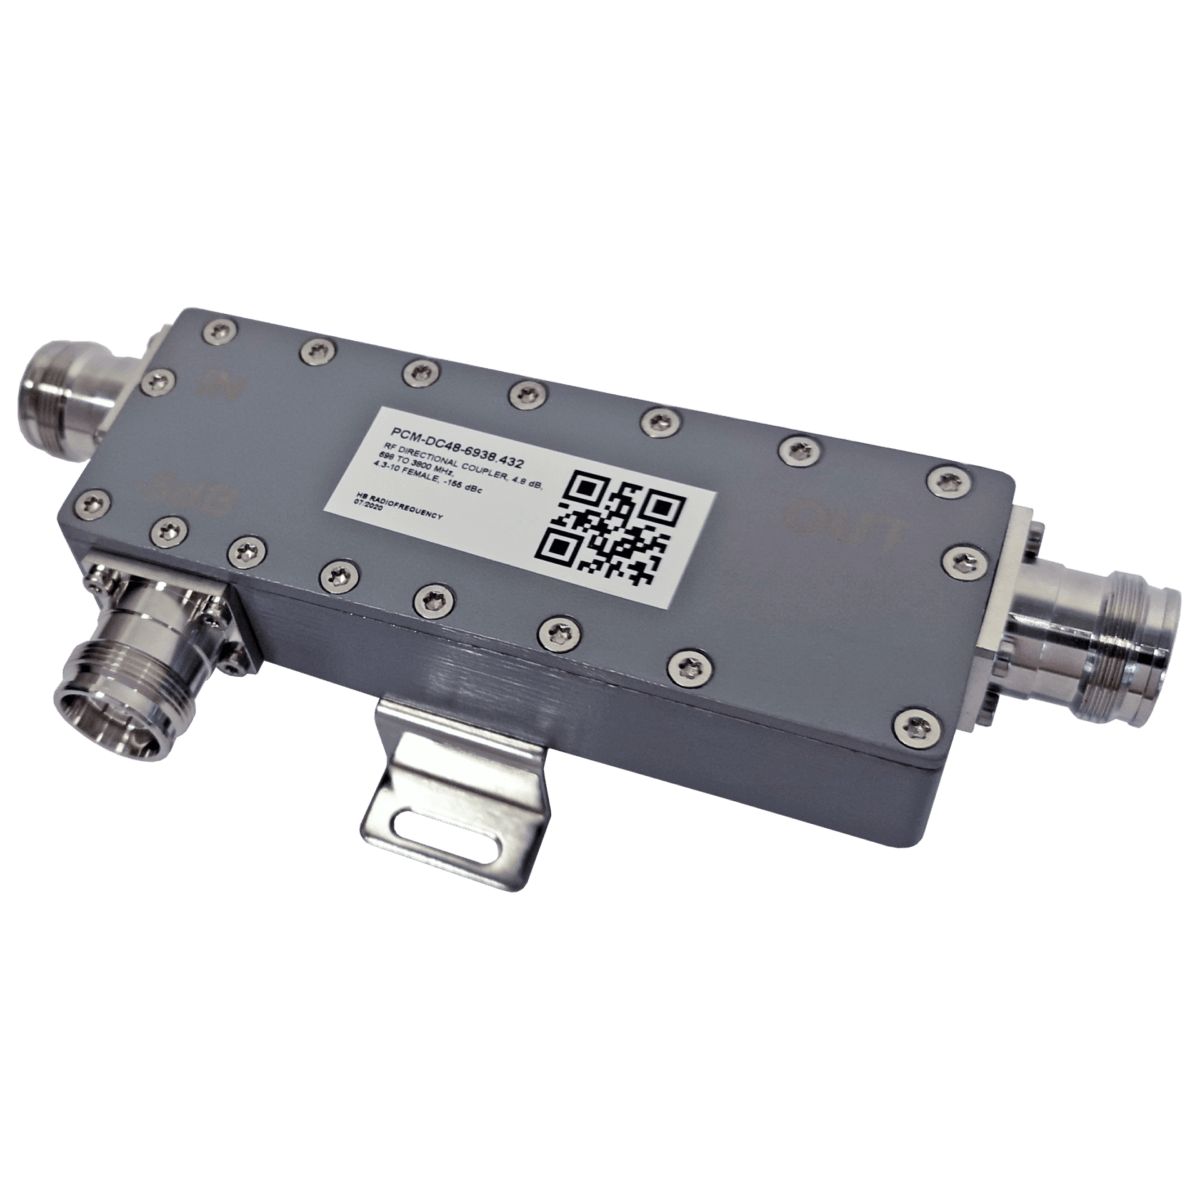 High-Frequency Directional Couplers for Signal Isolation and Measurement Applications